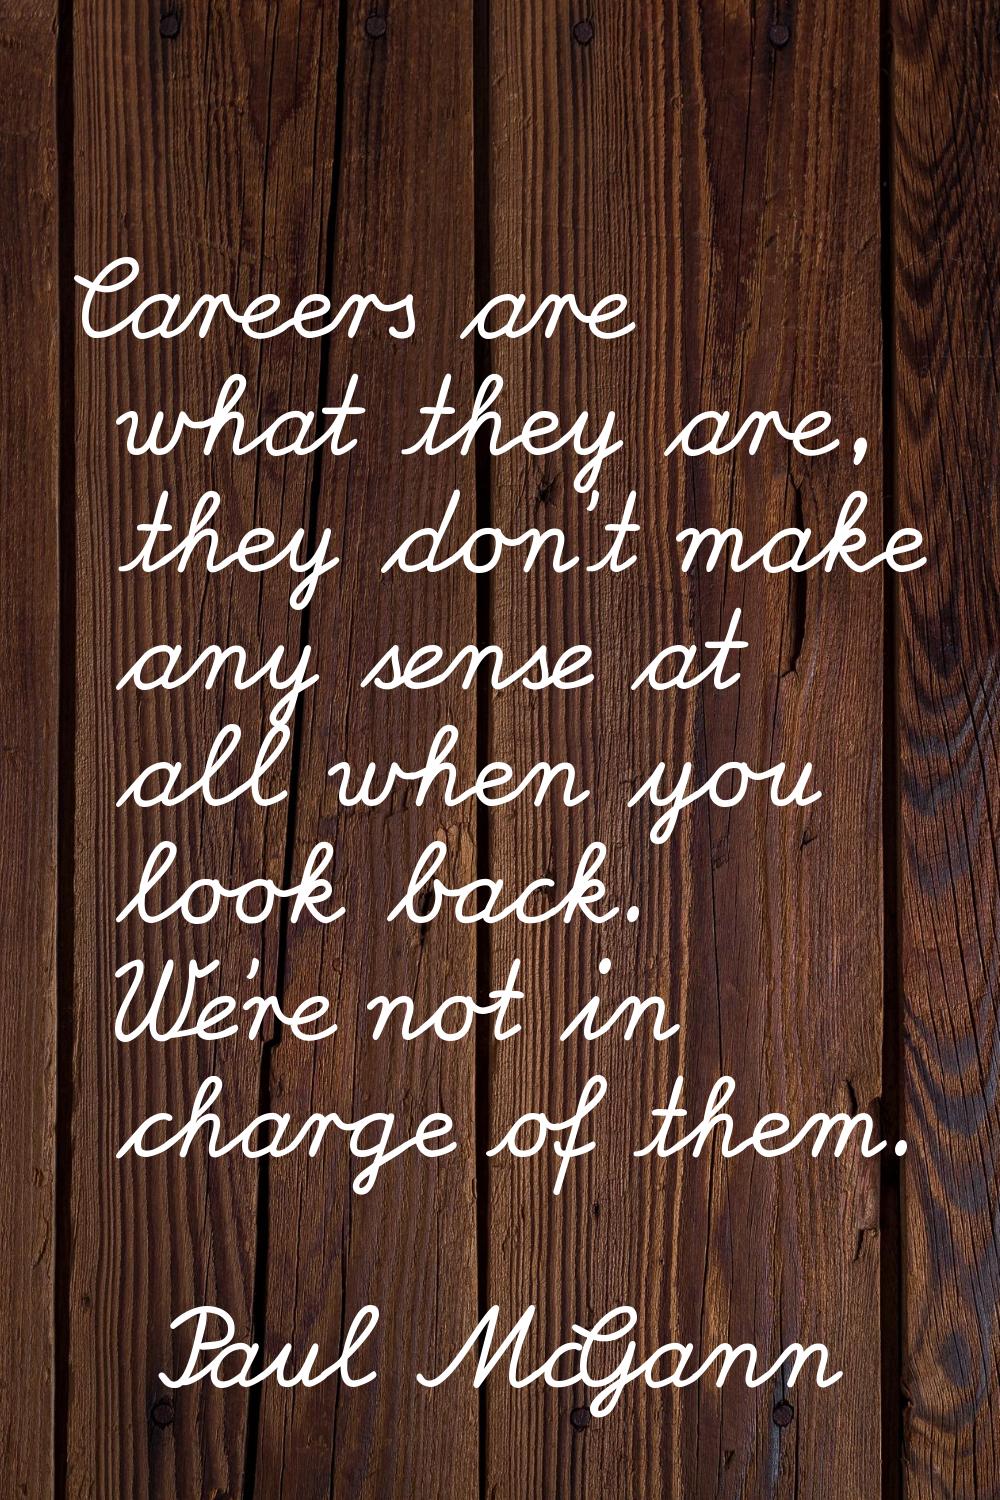 Careers are what they are, they don't make any sense at all when you look back. We're not in charge